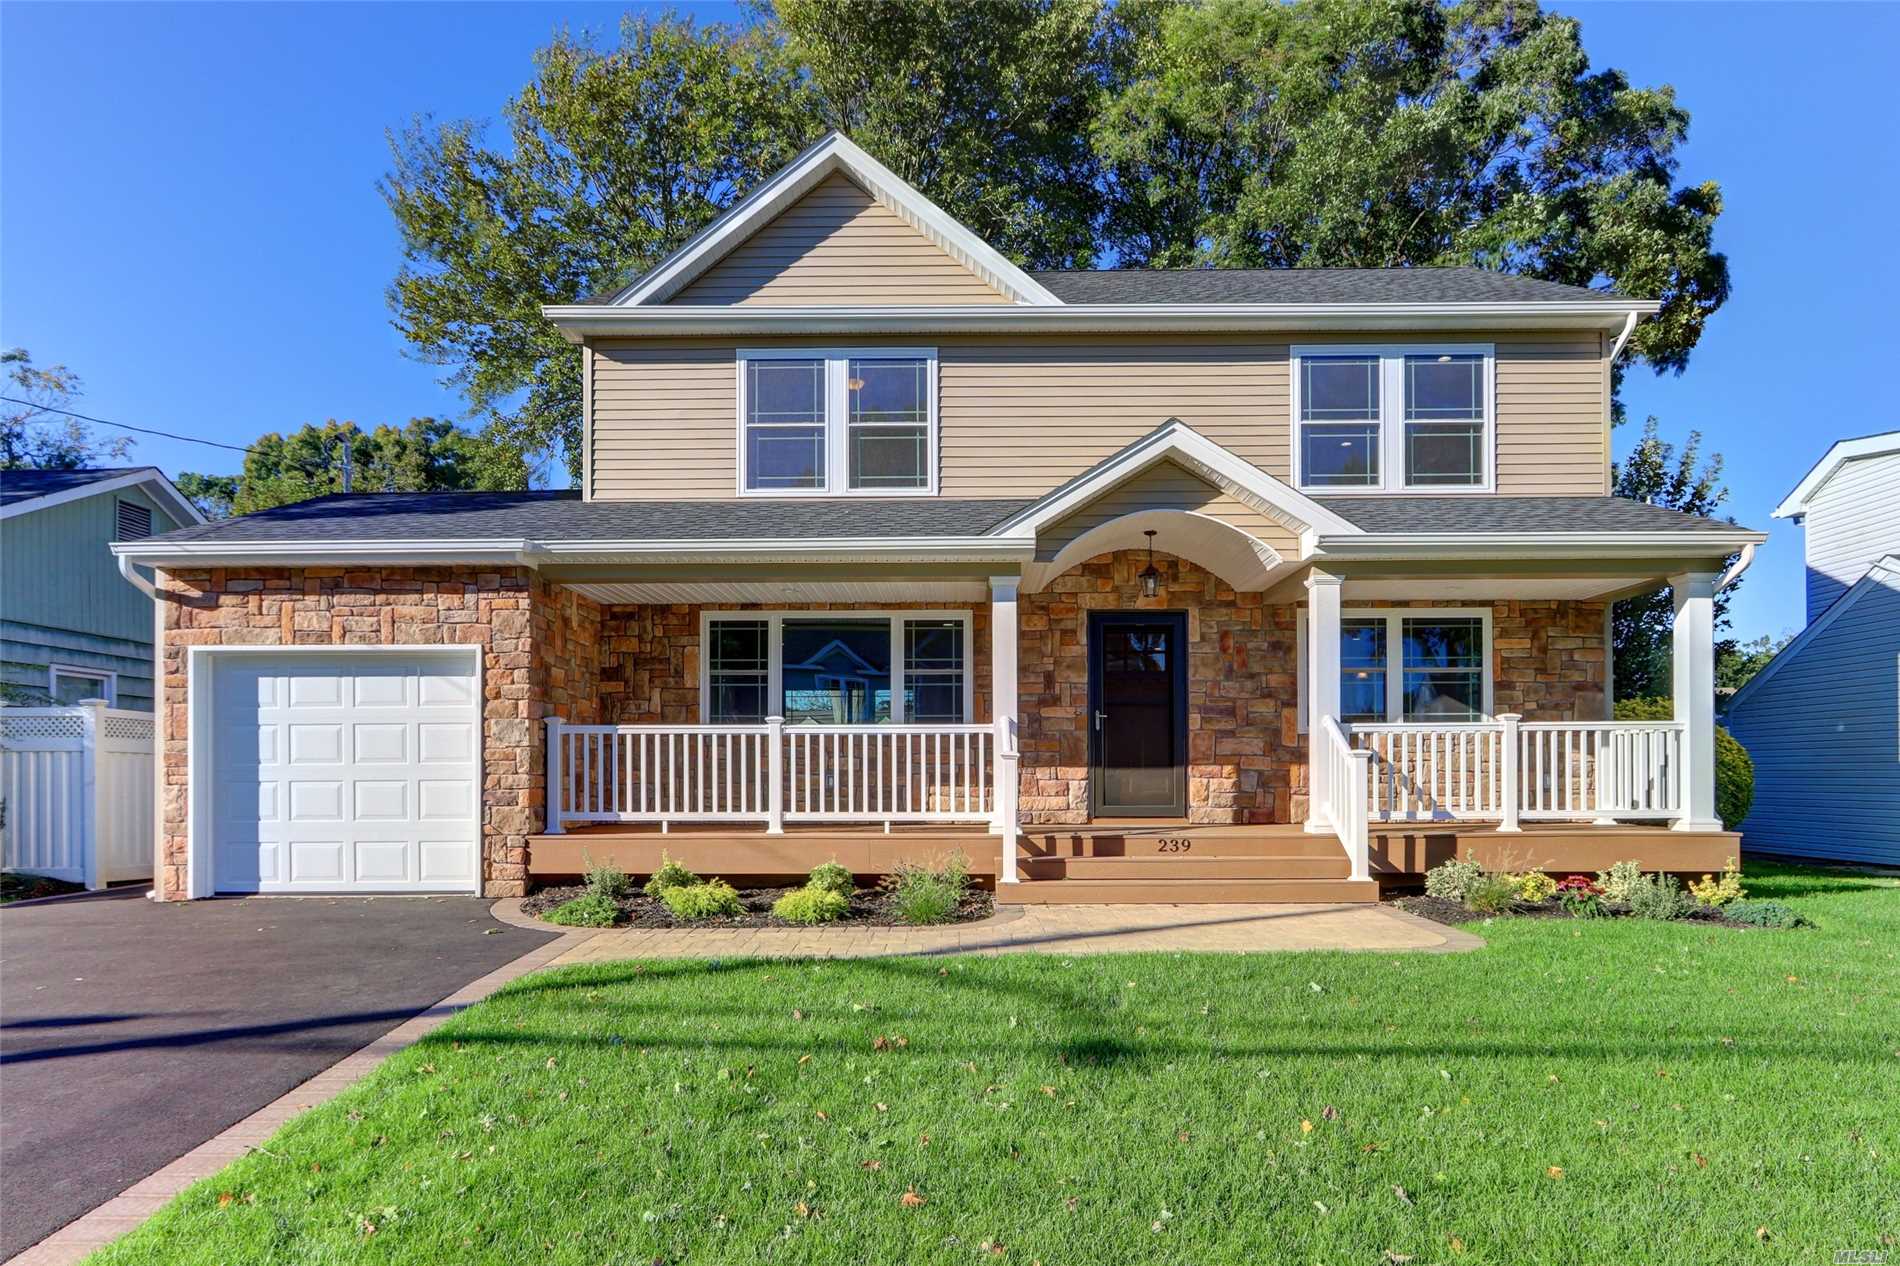 This Diamond Colonial Is Fully Loaded Featuring Stunning Kitchen/Granite Island/Ge Profile Ss Appl...Gleaming Hardwood Flrs..Crown Molding Thru Out 1st Flr..Master Bedroom W/2 Walk In Closets/Full Bath/Cac..Hydronic Gas Htg..2Zone...Igs..Front Porch..One Car Garage/ Builder Spared No Expense